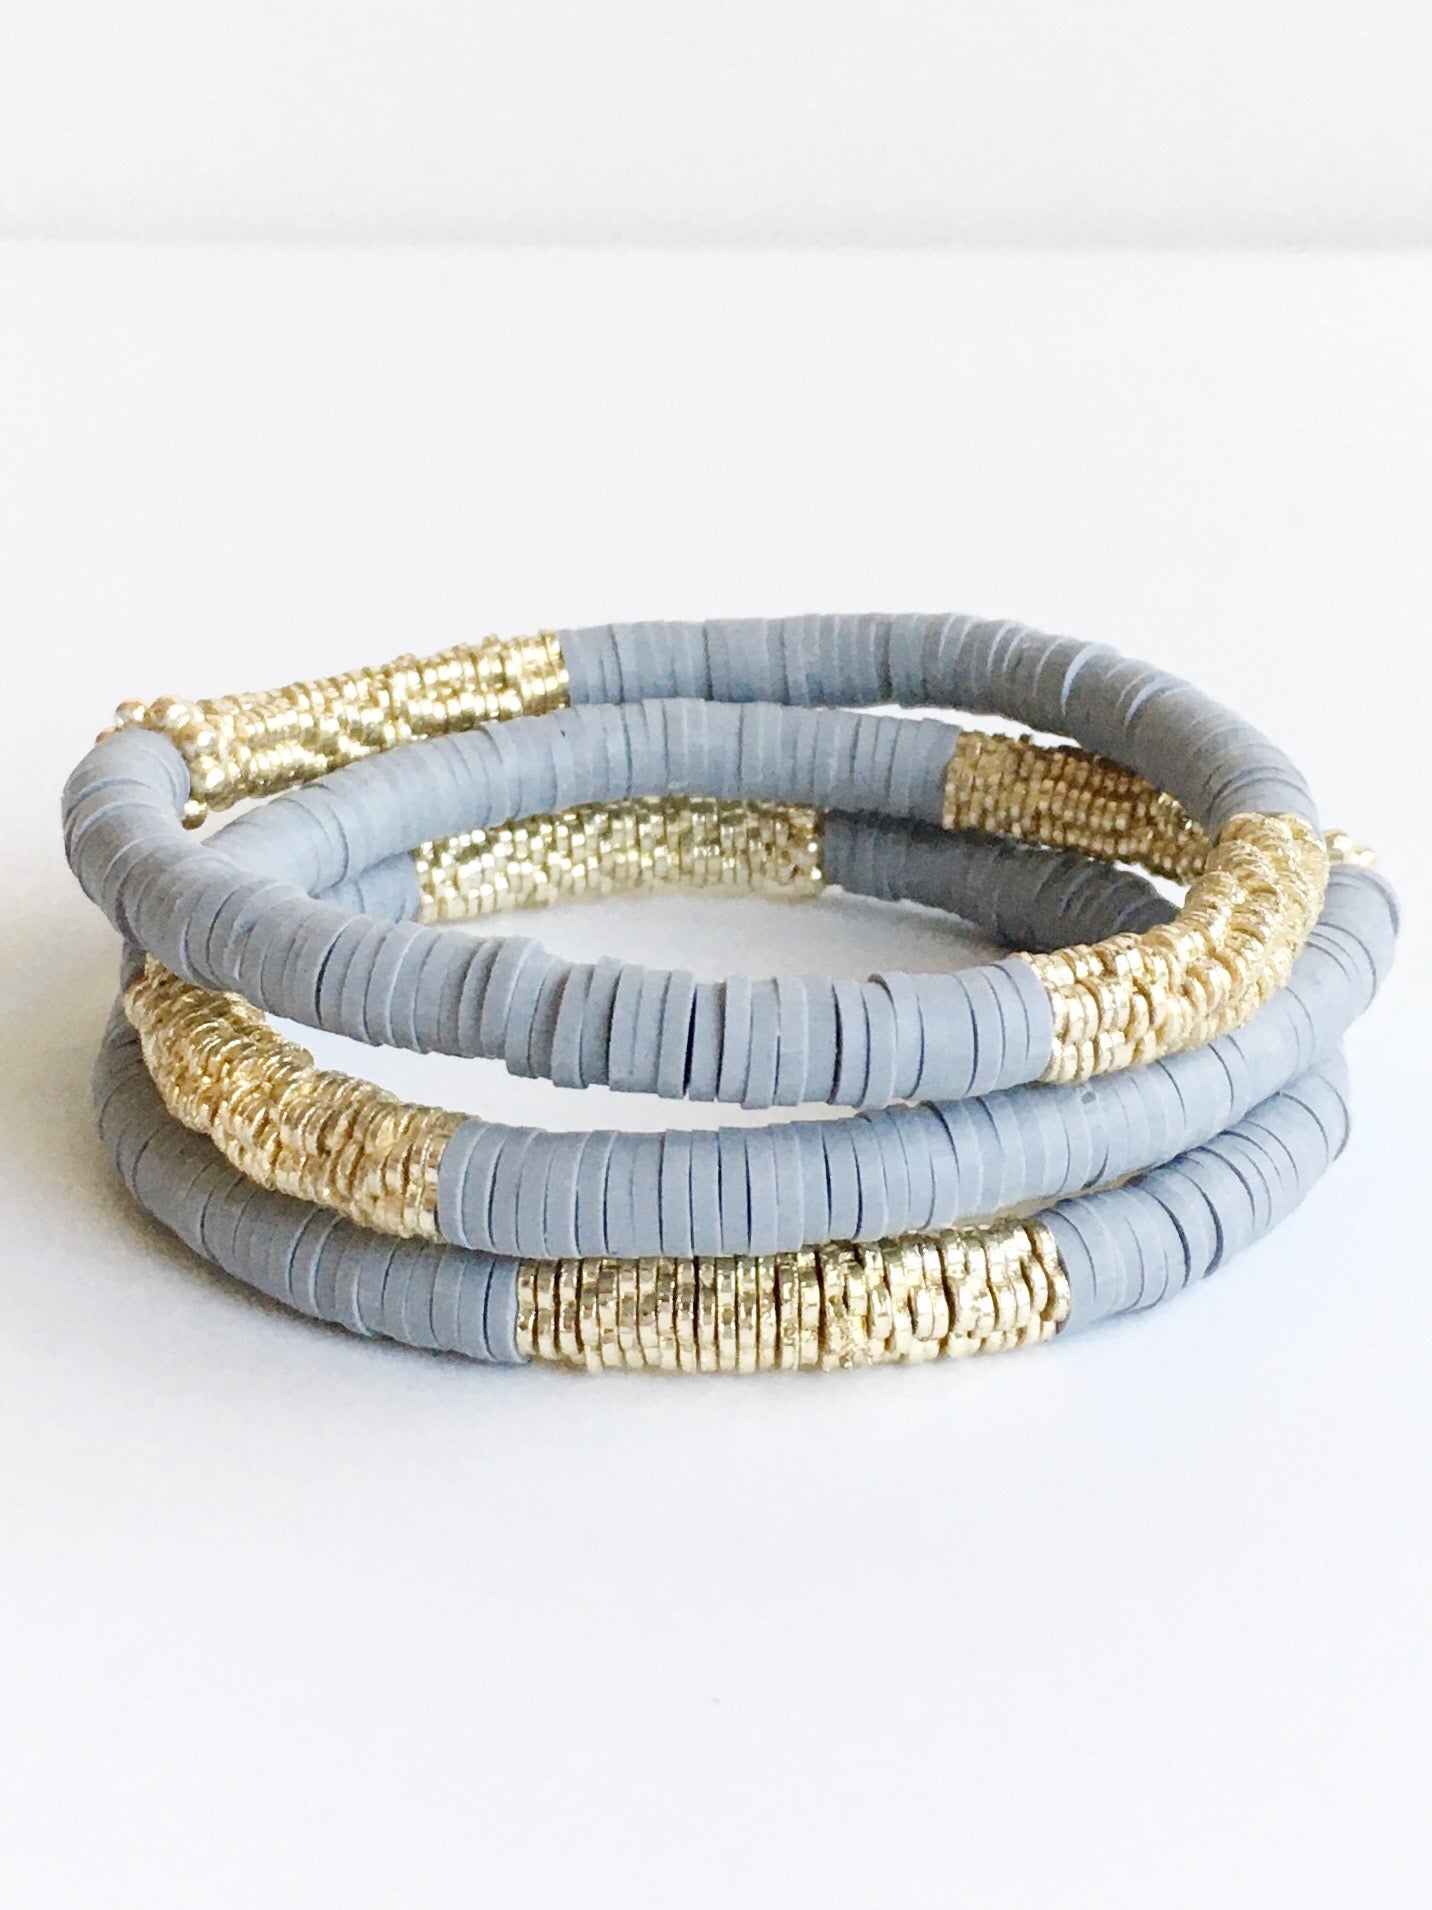 Three Dark Gray Confetti and Gold Beaded Stretch Bracelets stacked.